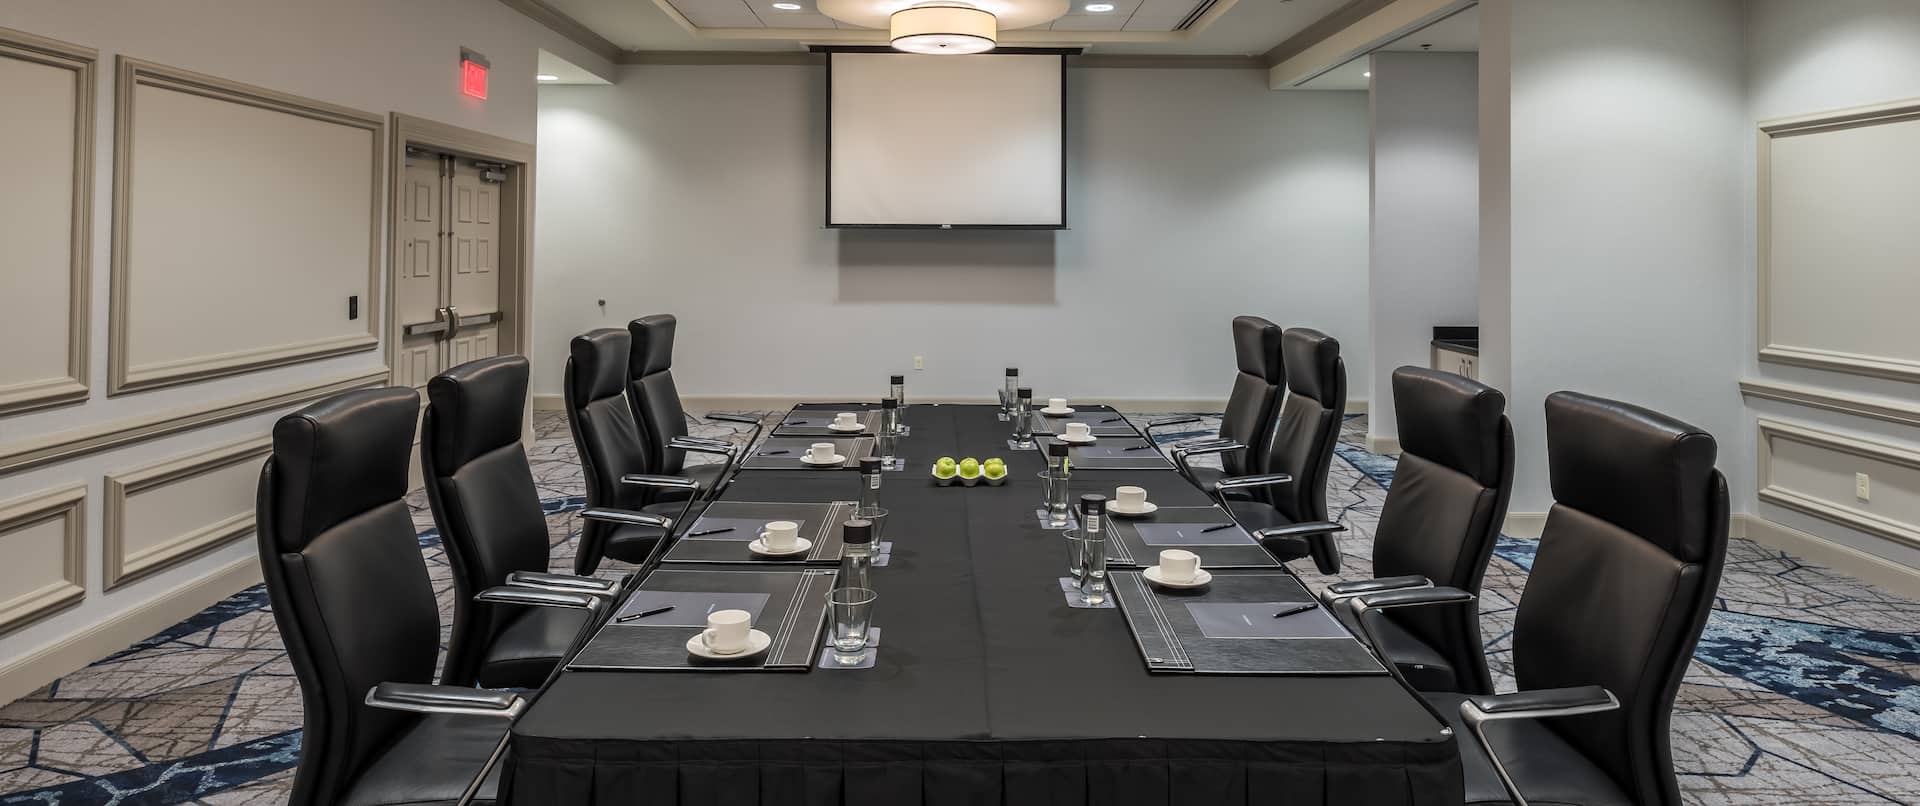 Boardroom with Meeting Table, Office Chairs and Projector Screen